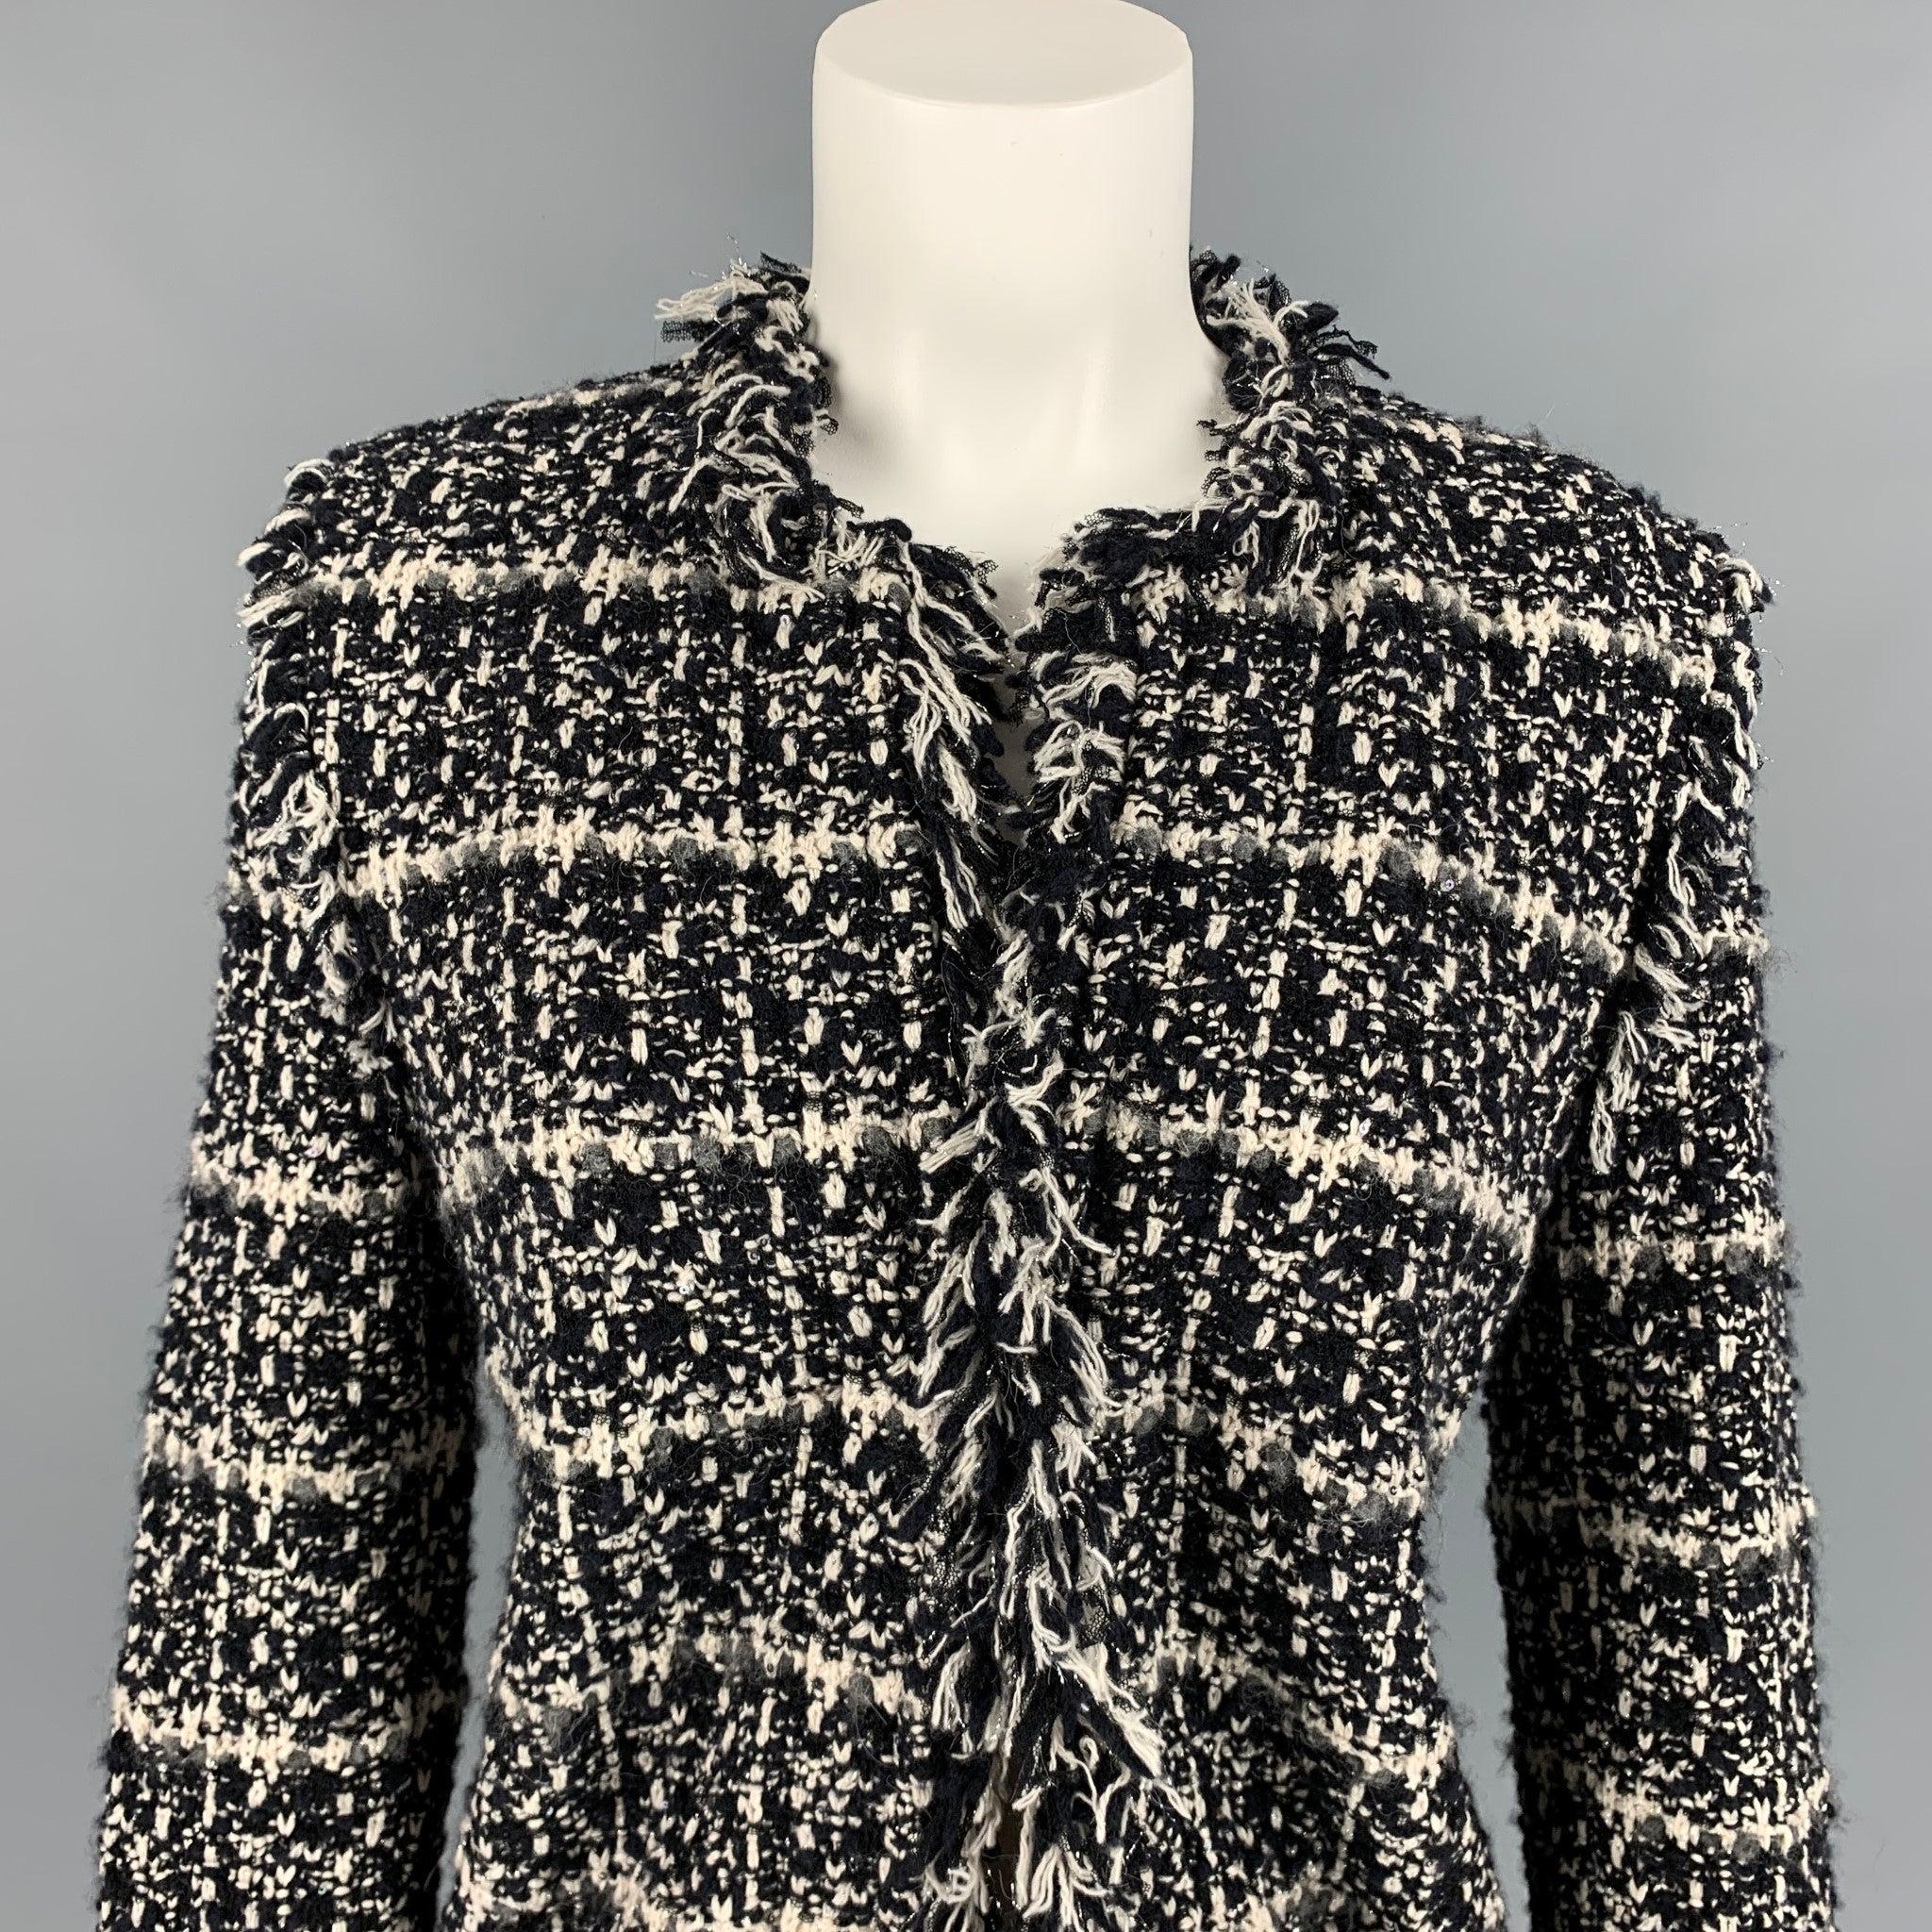 LES COPAINS jacket comes in a black & white boucle cotton blend featuring a fringe trim and a hook & loop closure.
Very Good
Pre-Owned Condition. 

Marked:   42 

Measurements: 
 
Shoulder: 16 inches  Bust: 34 inches  Sleeve: 25 inches  Length: 21